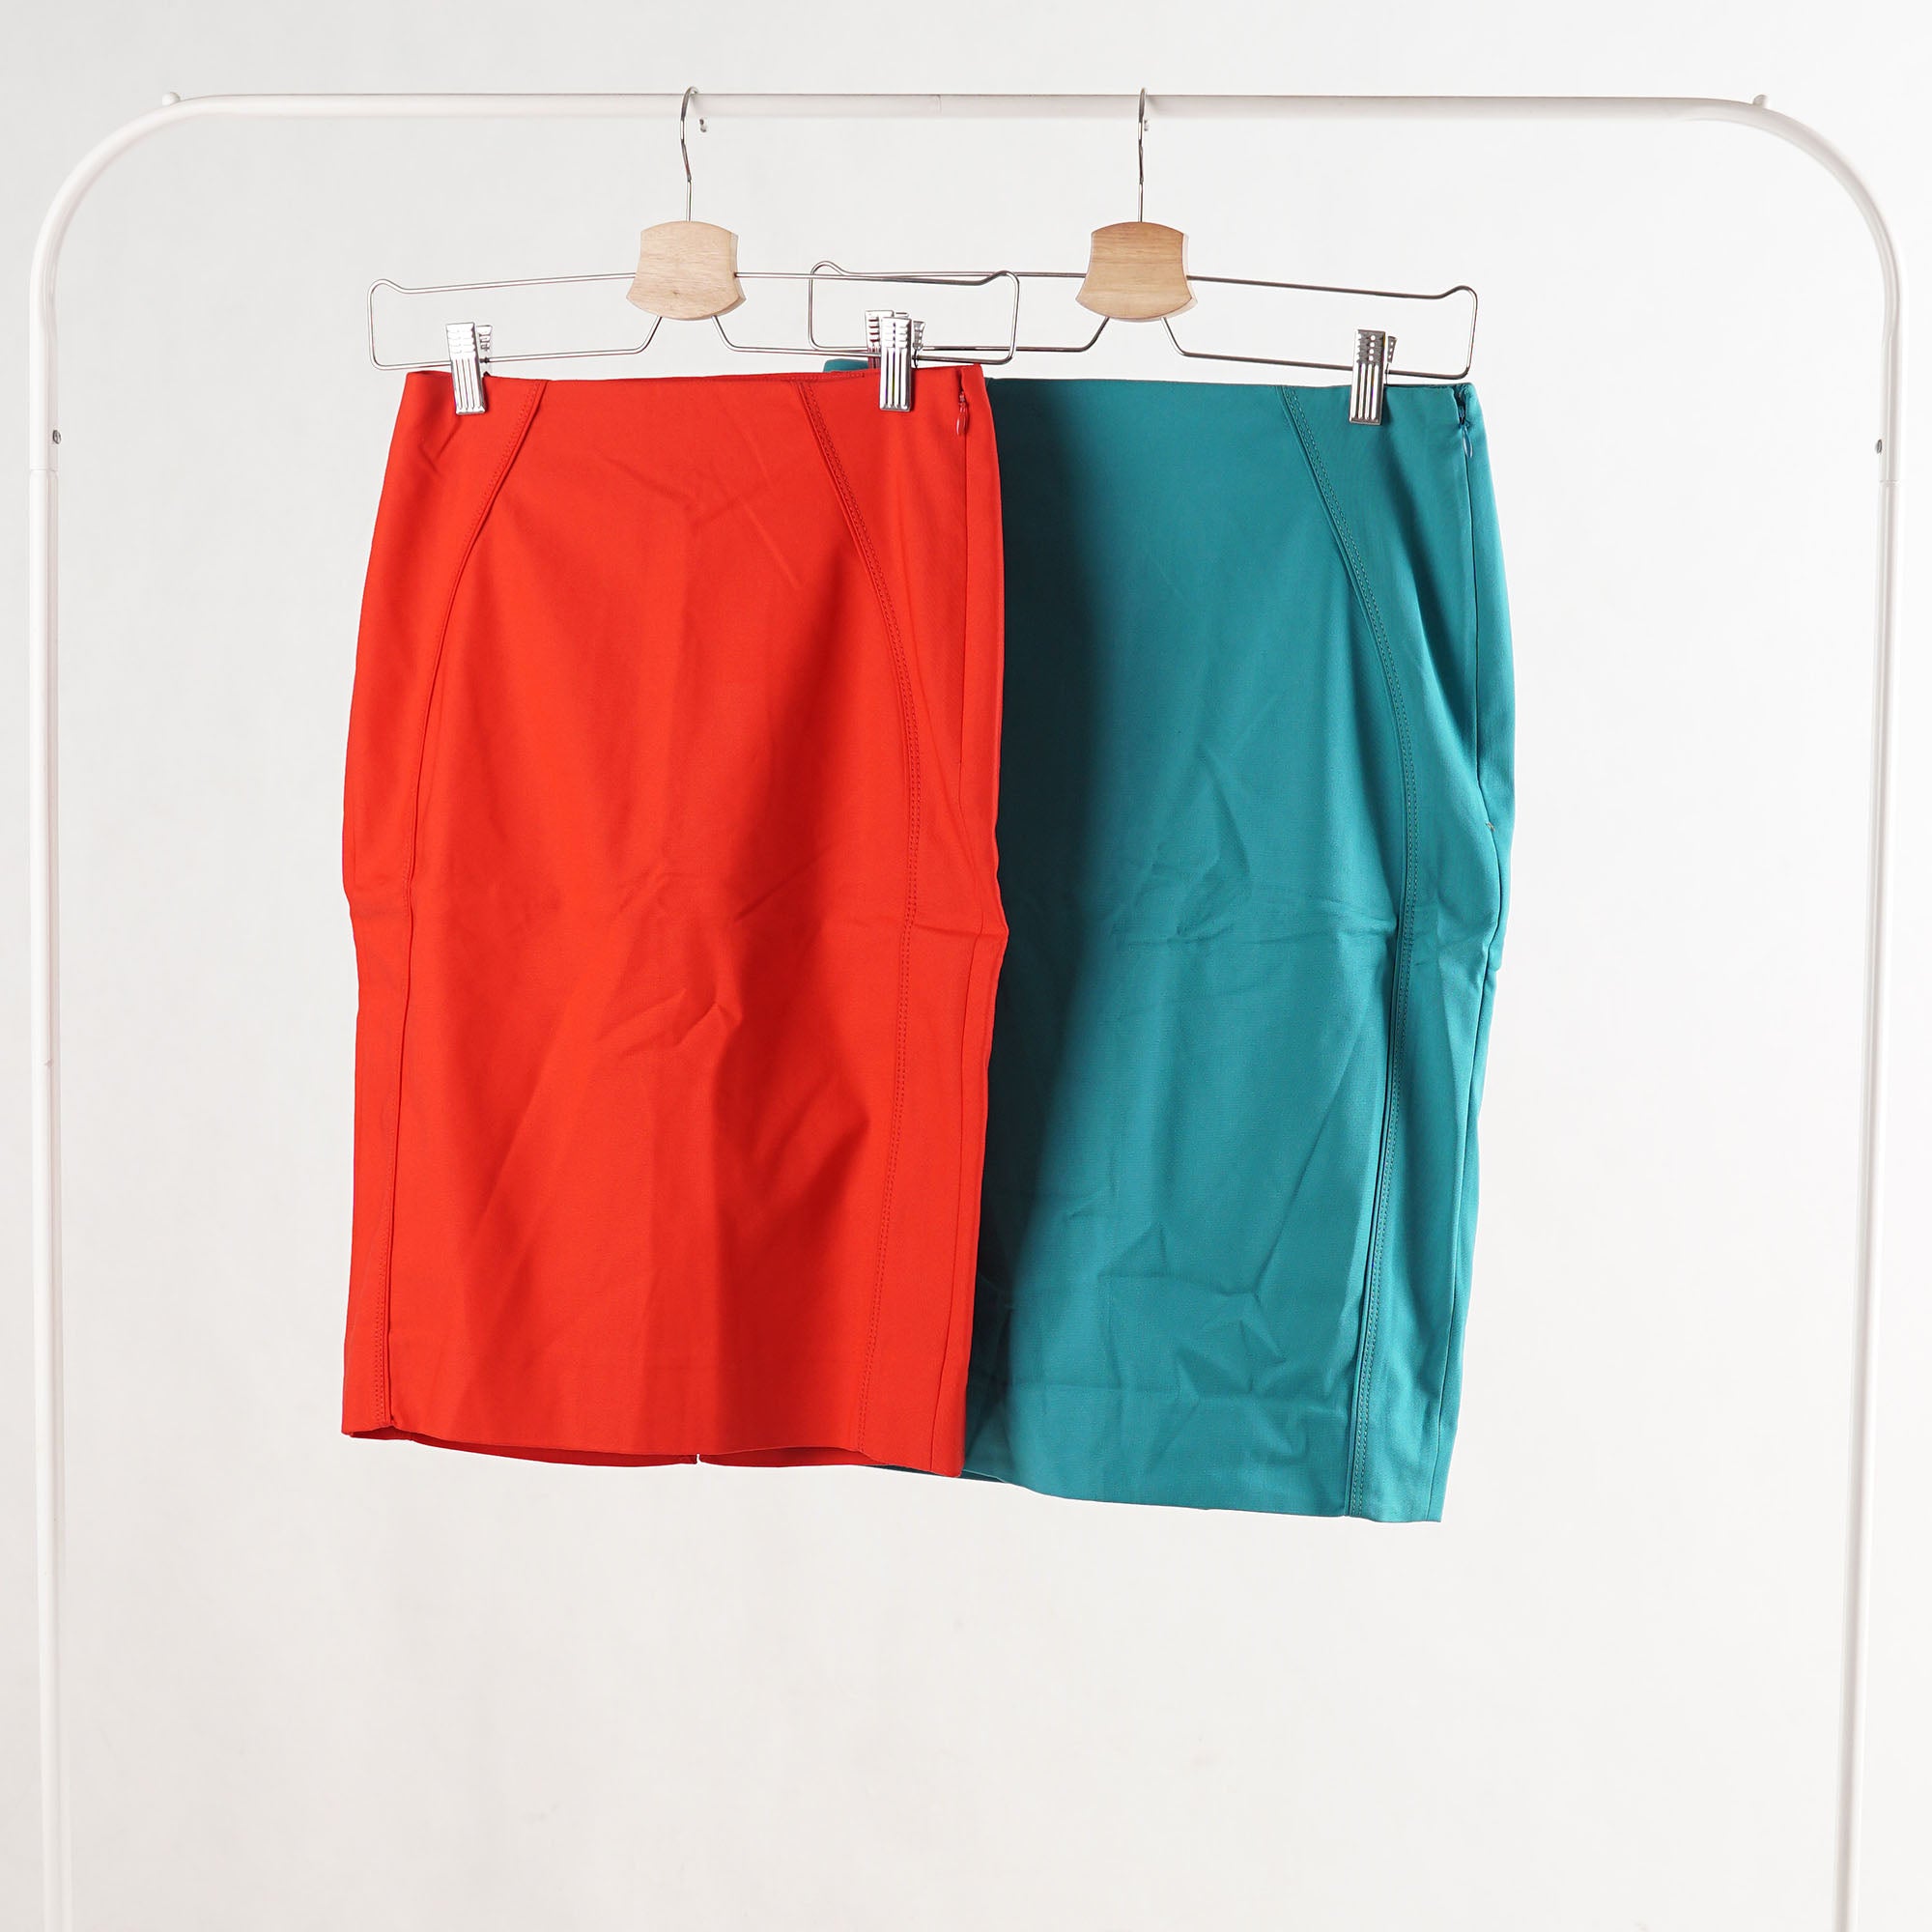 Rok Wanita - Red And Tosca Women Skirt (MWR 01)